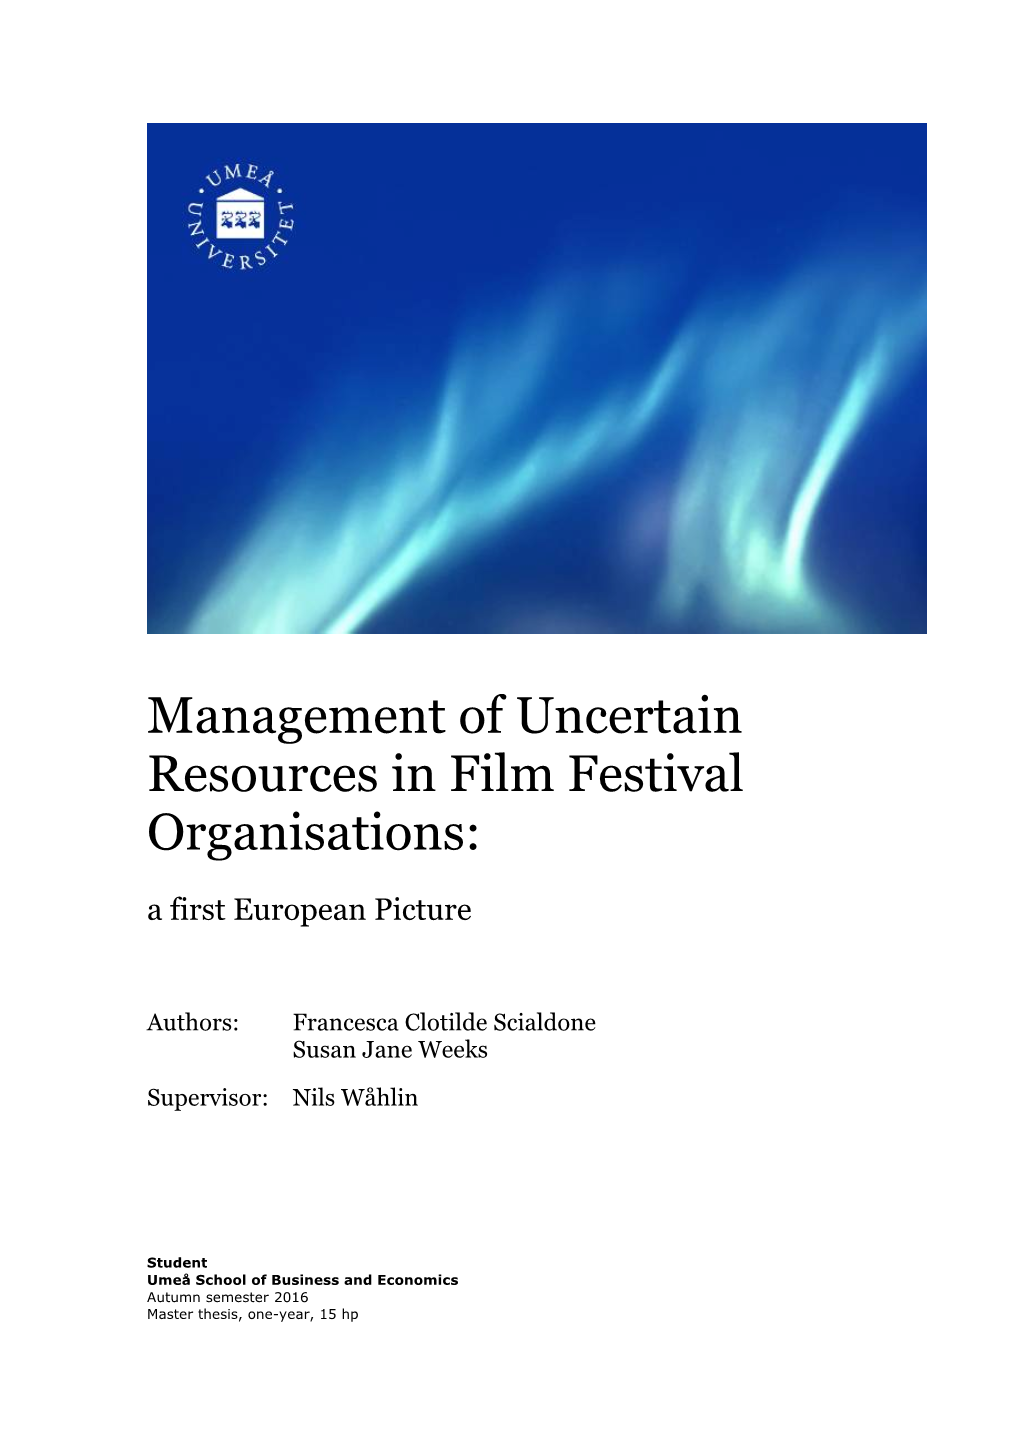 Management of Uncertain Resources in Film Festival Organisations: a First European Picture